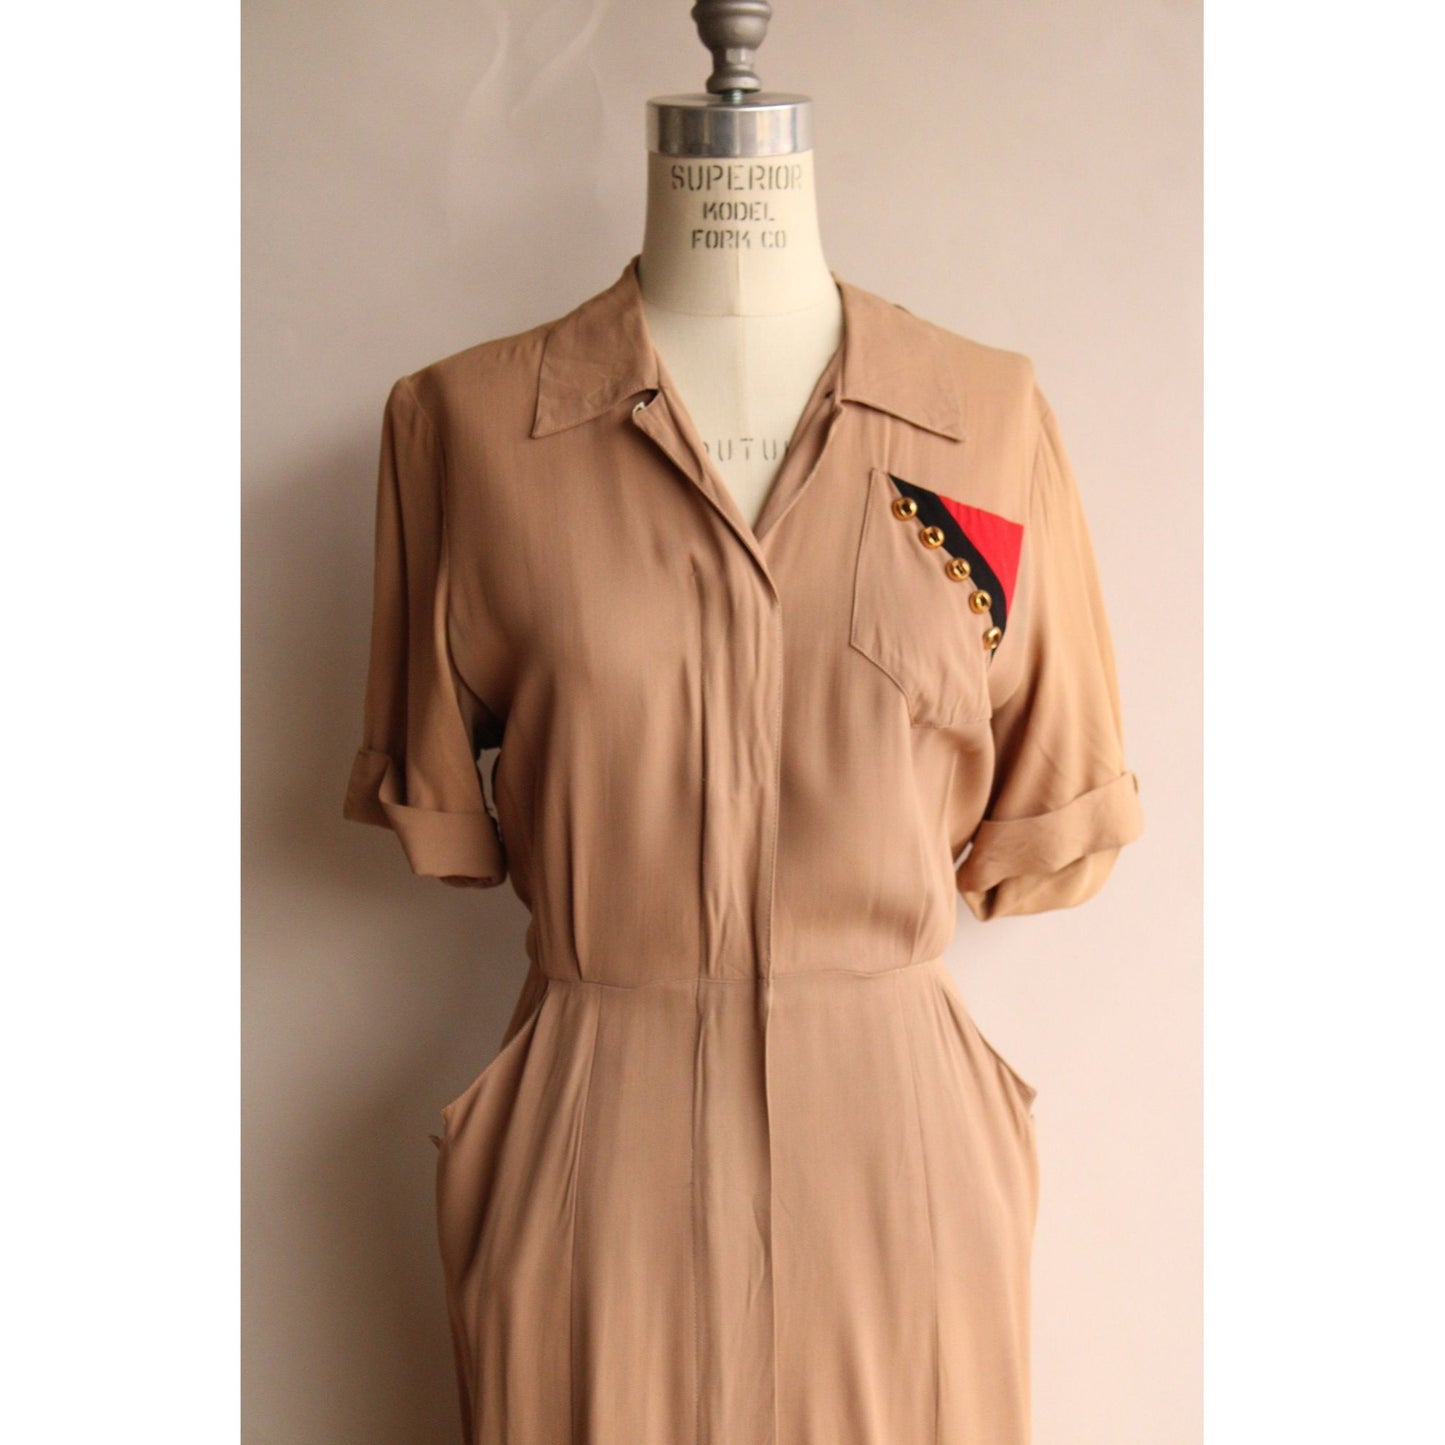 Vintage 1940s Bullocks Californienne Day Dress With Military Feel